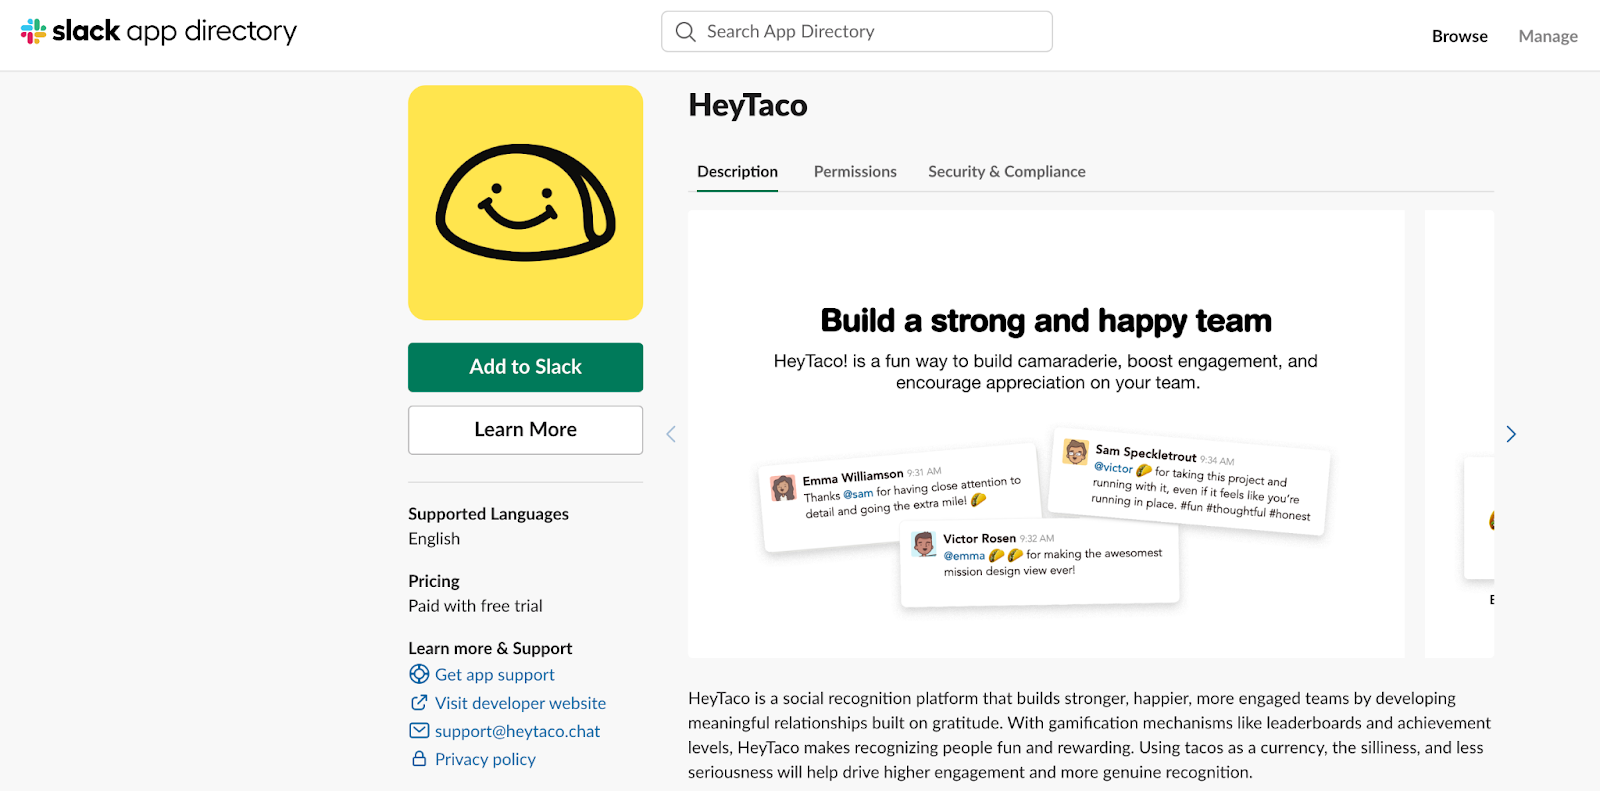 "HeyTaco" section on slack app directory page